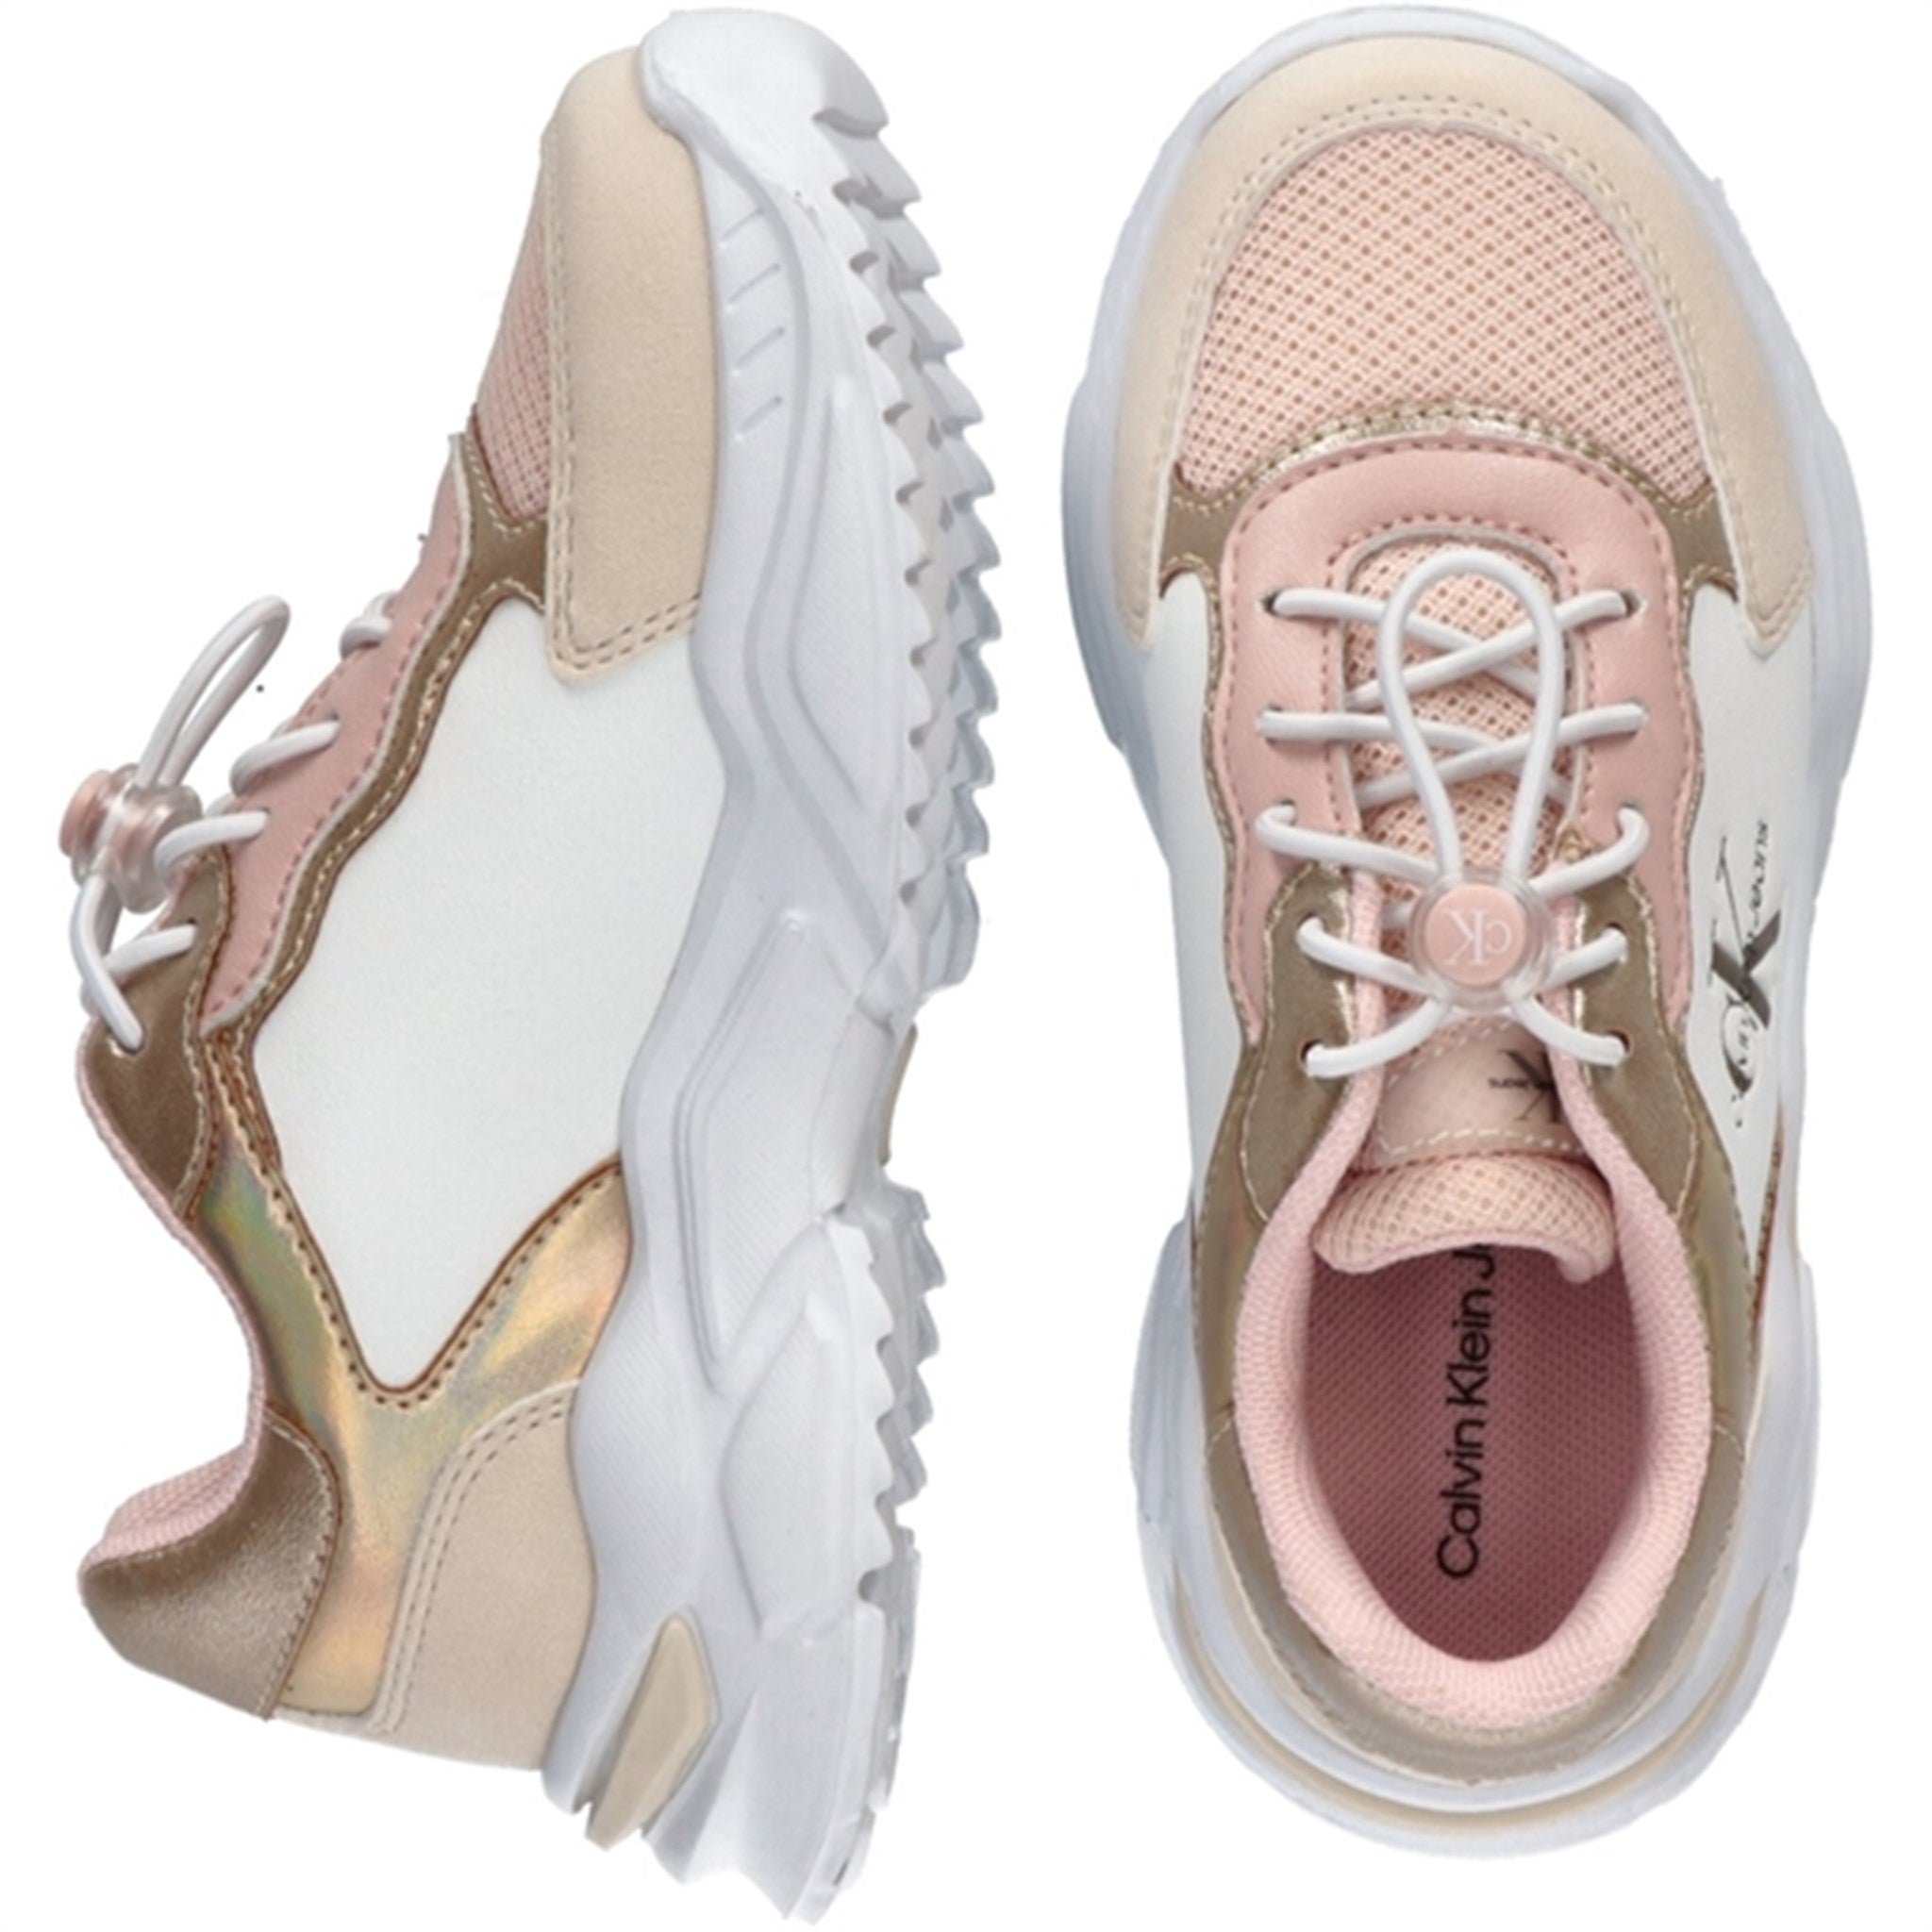 Calvin Klein Low Cut Lace-Up Sneakers Beige/Nude/White 2